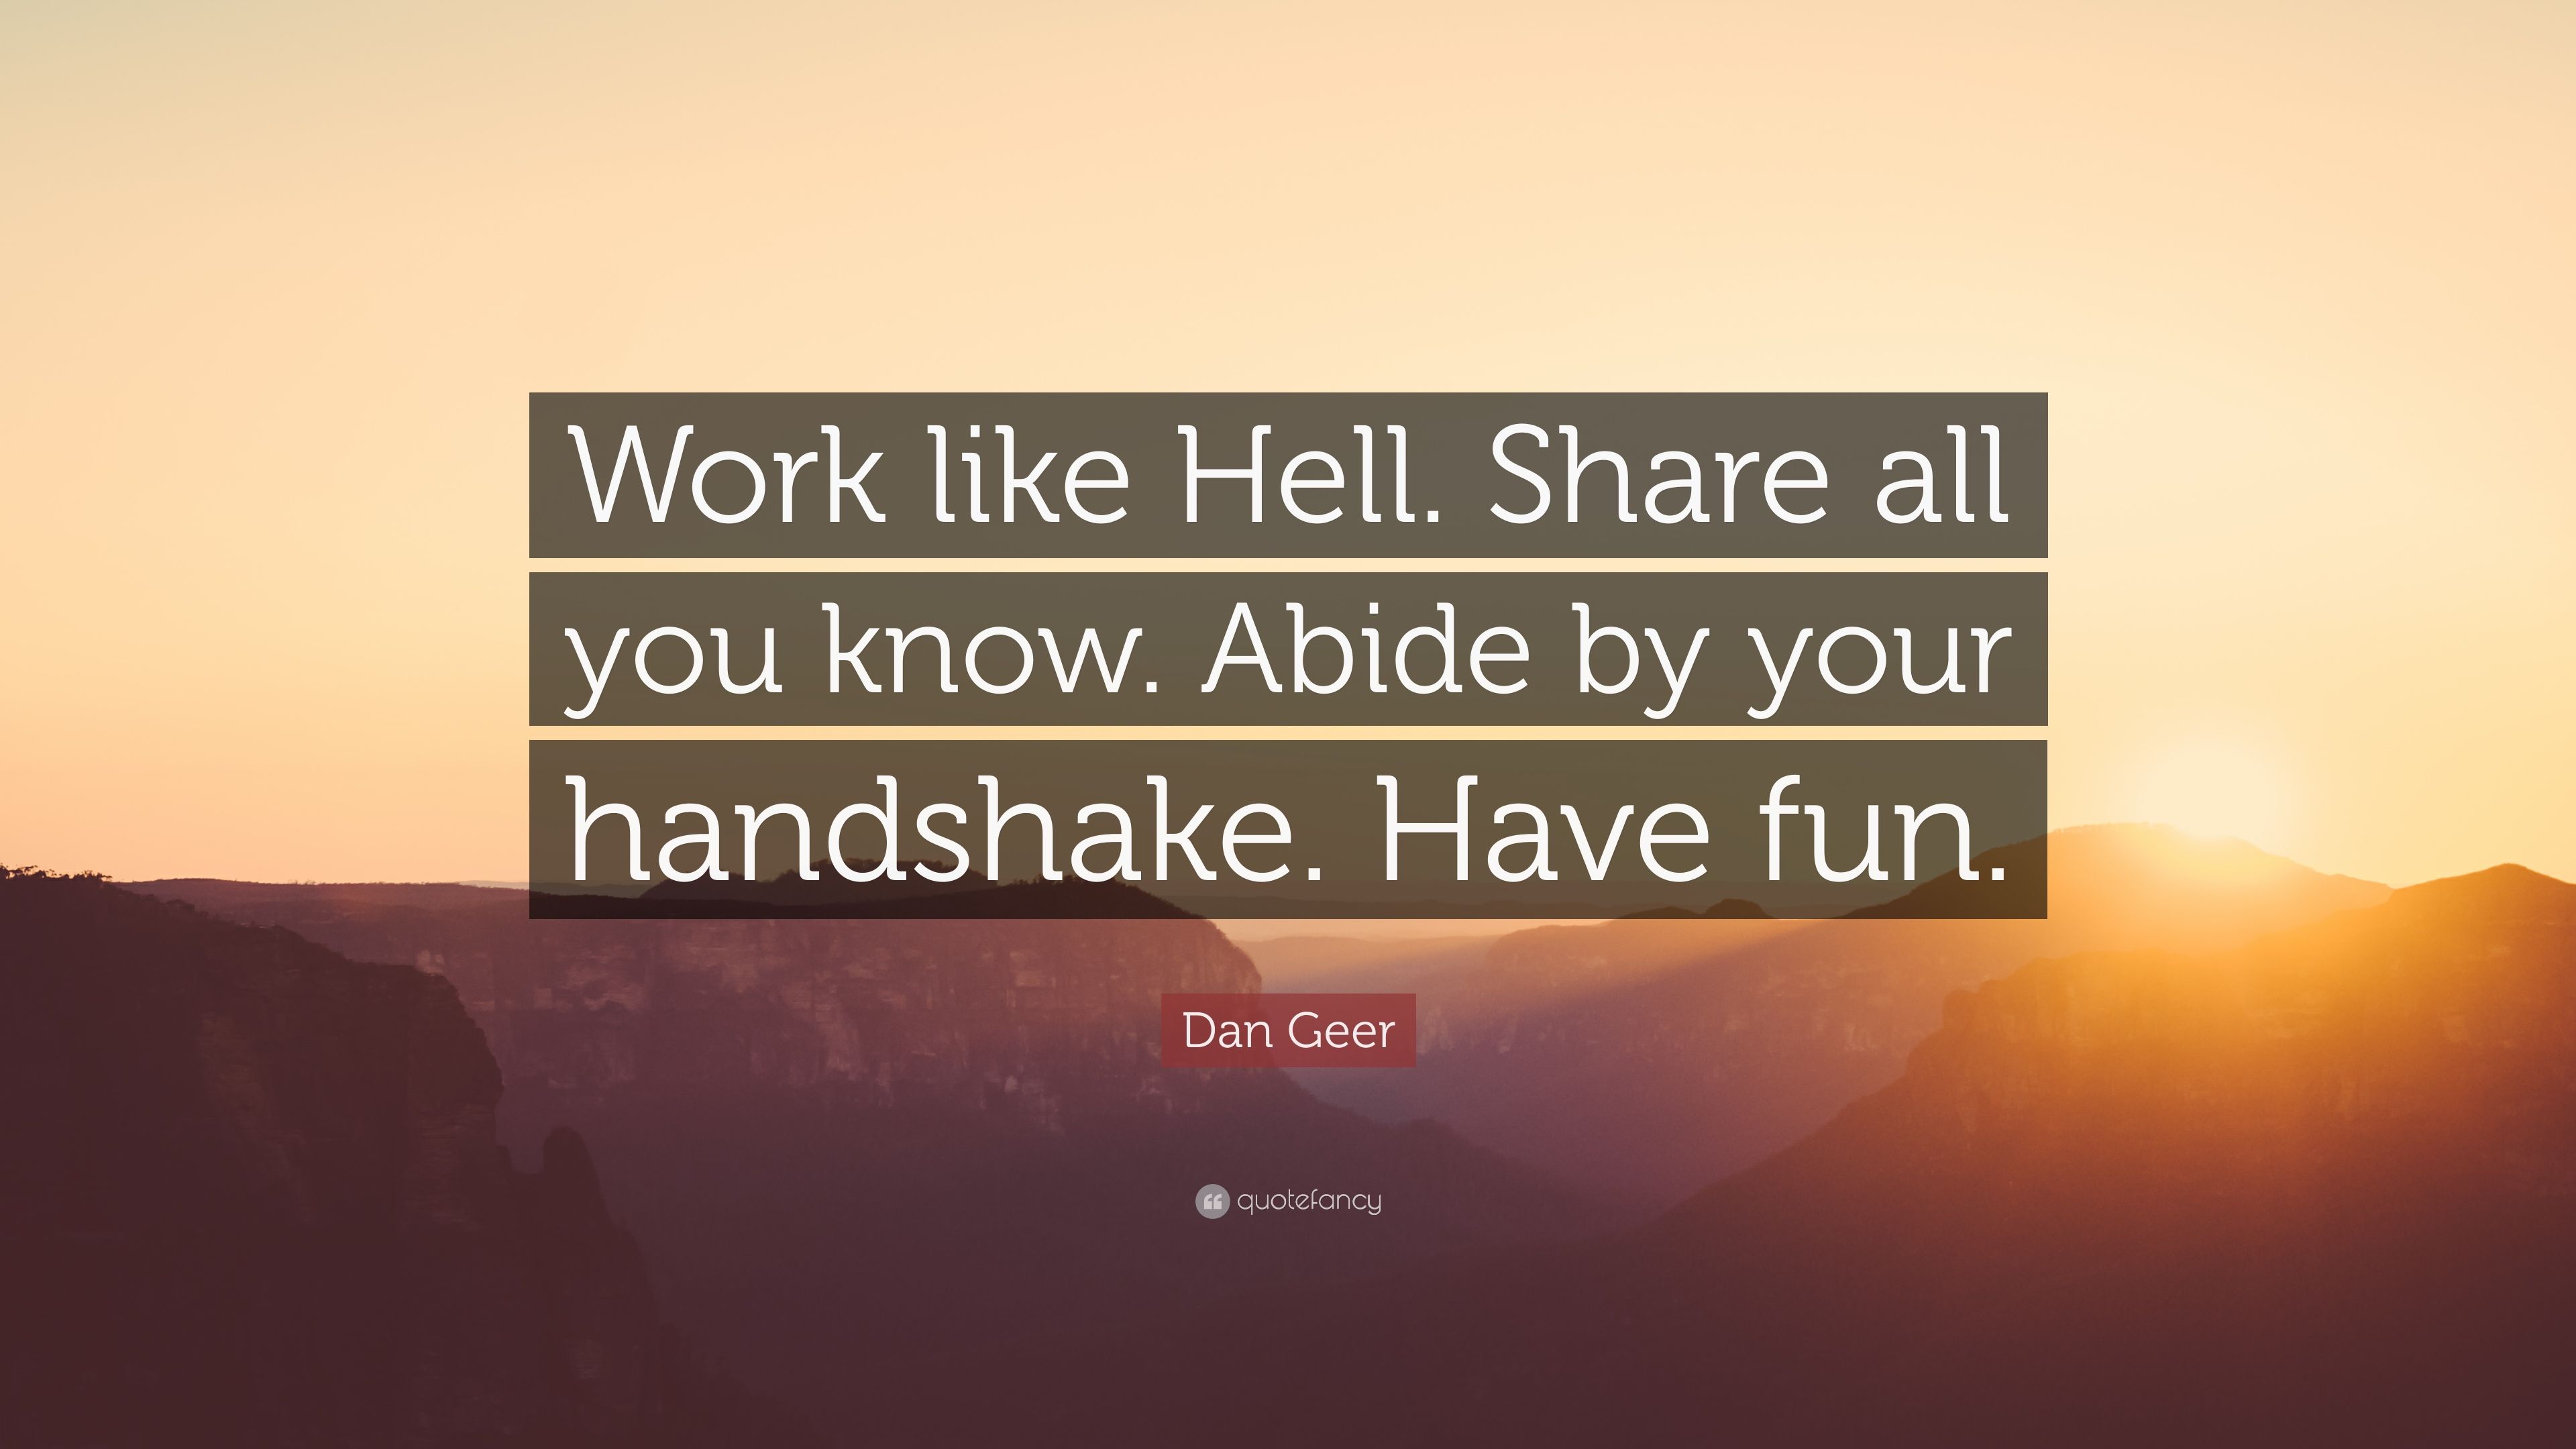 Dan Geer Quote: “Work like Hell. Share all you know. Abide by your handshake. Have fun.” (7 wallpaper)